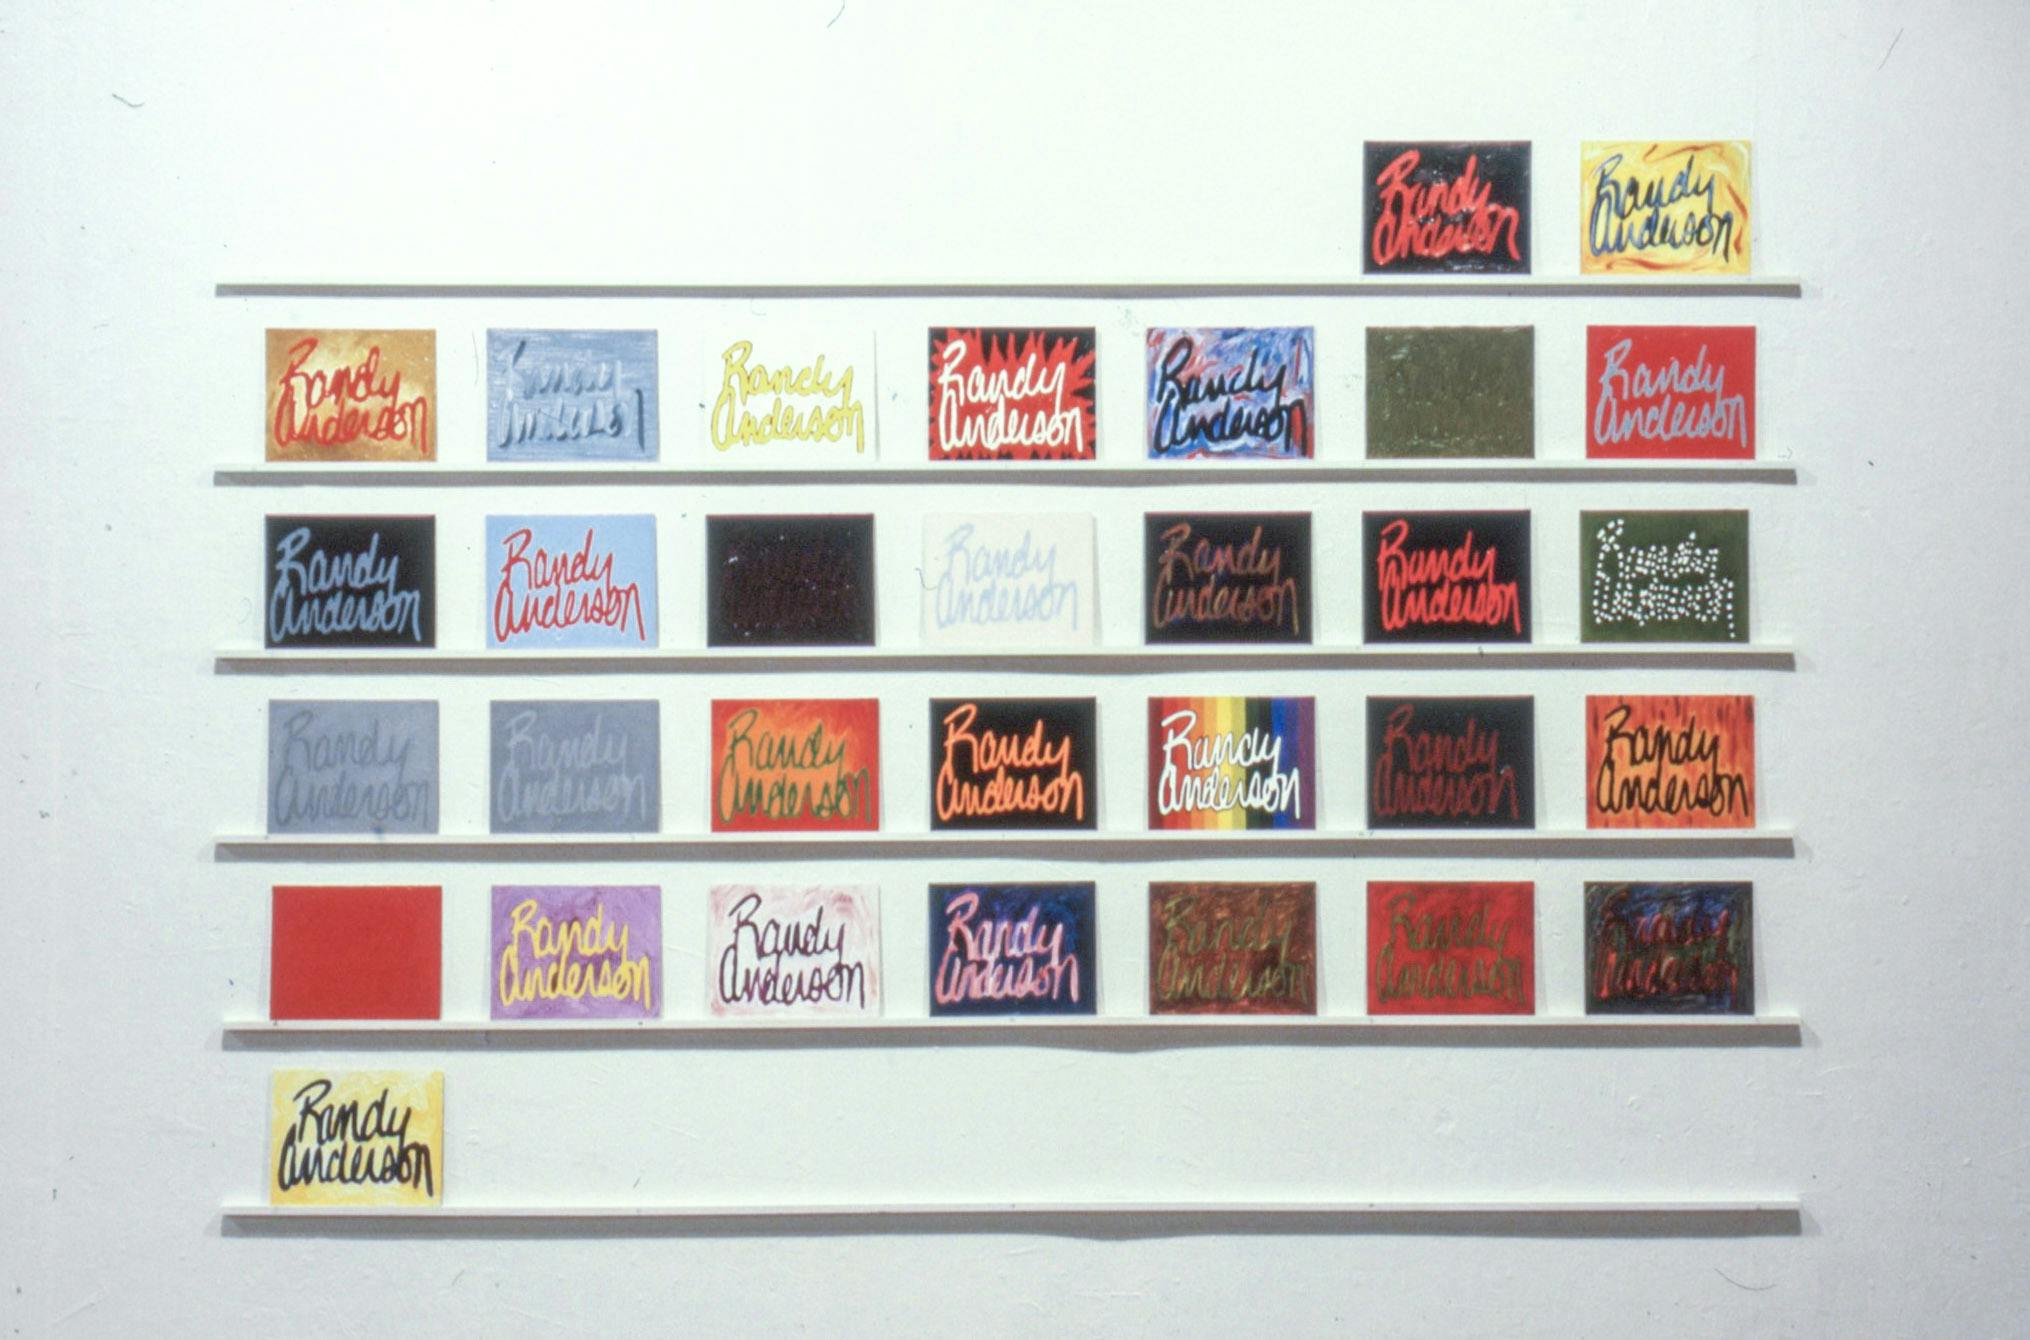 A close-up of 31 small paintings on narrow white shelves on a wall. The paintings are colourful and textured, reading "Randy Anderson" in various styles of cursive.